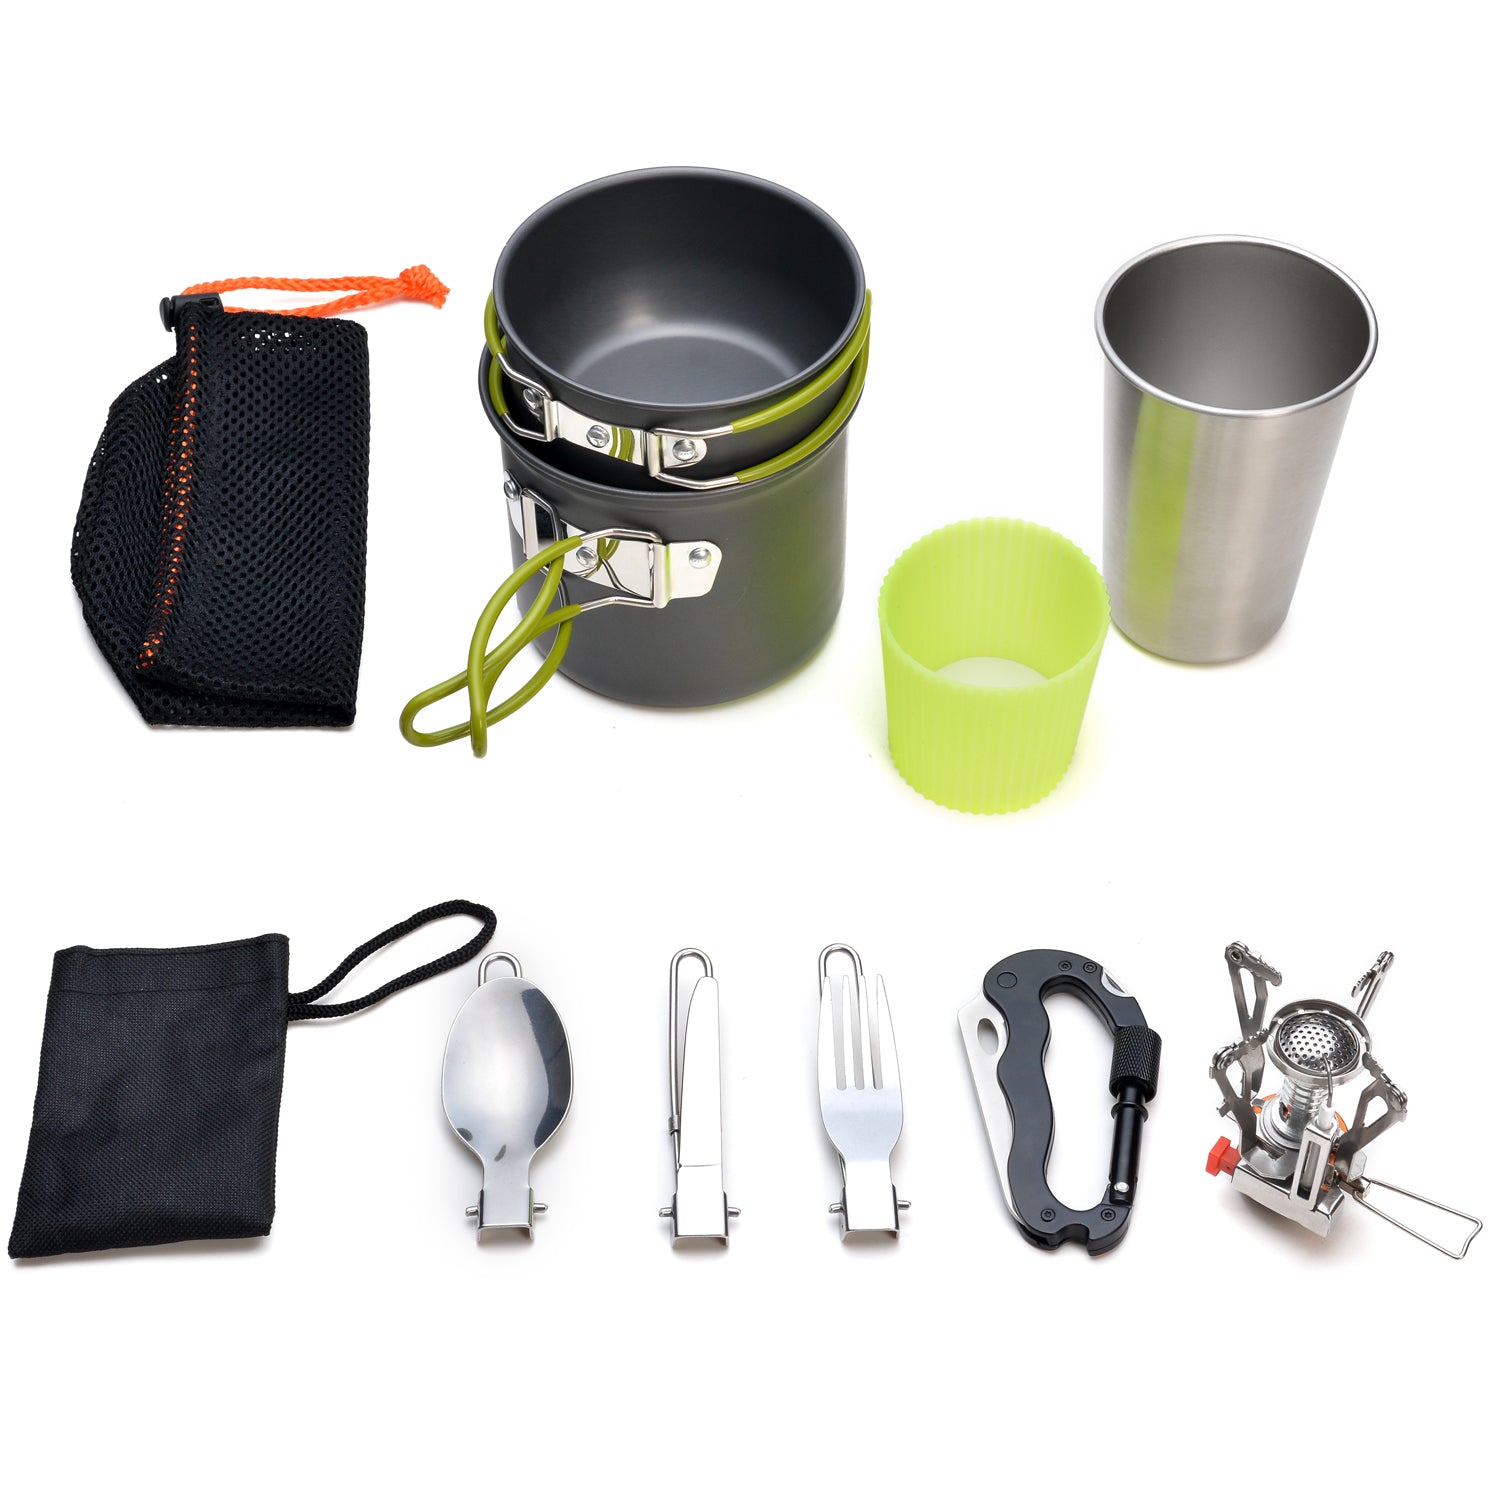 Odoland Camping Cookware Kit, Lightweight Portable Cookware Set with Water Cup, Fork Kit and Multi-functional Carabiner with Knife, Great for Backpacking, Outdoor Camping Hiking and Picnic